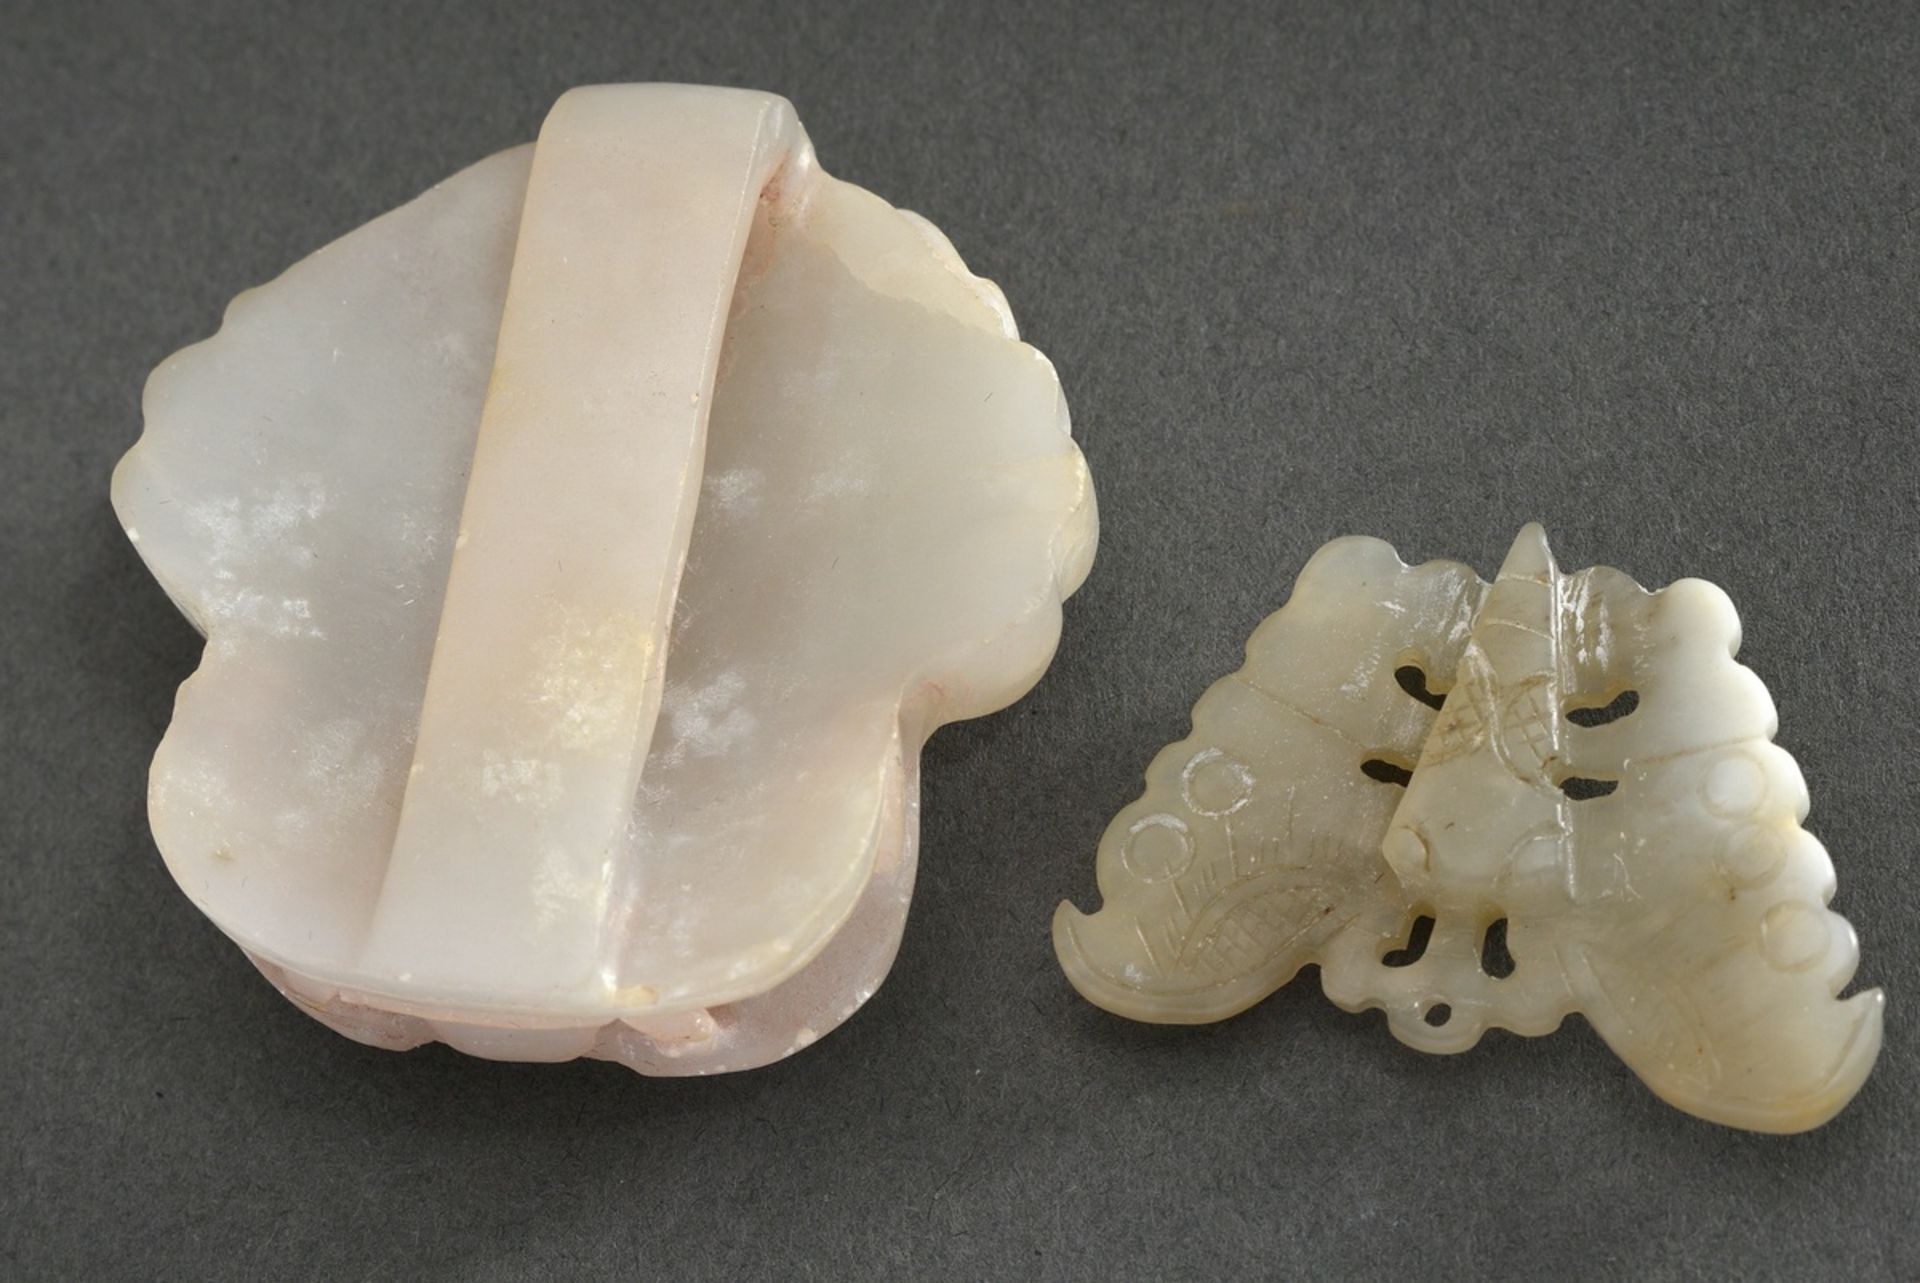 2 Miscellaneous Jade Objects: Belt buckle of white calcined jade "monster head" in Han style and pe - Image 2 of 2